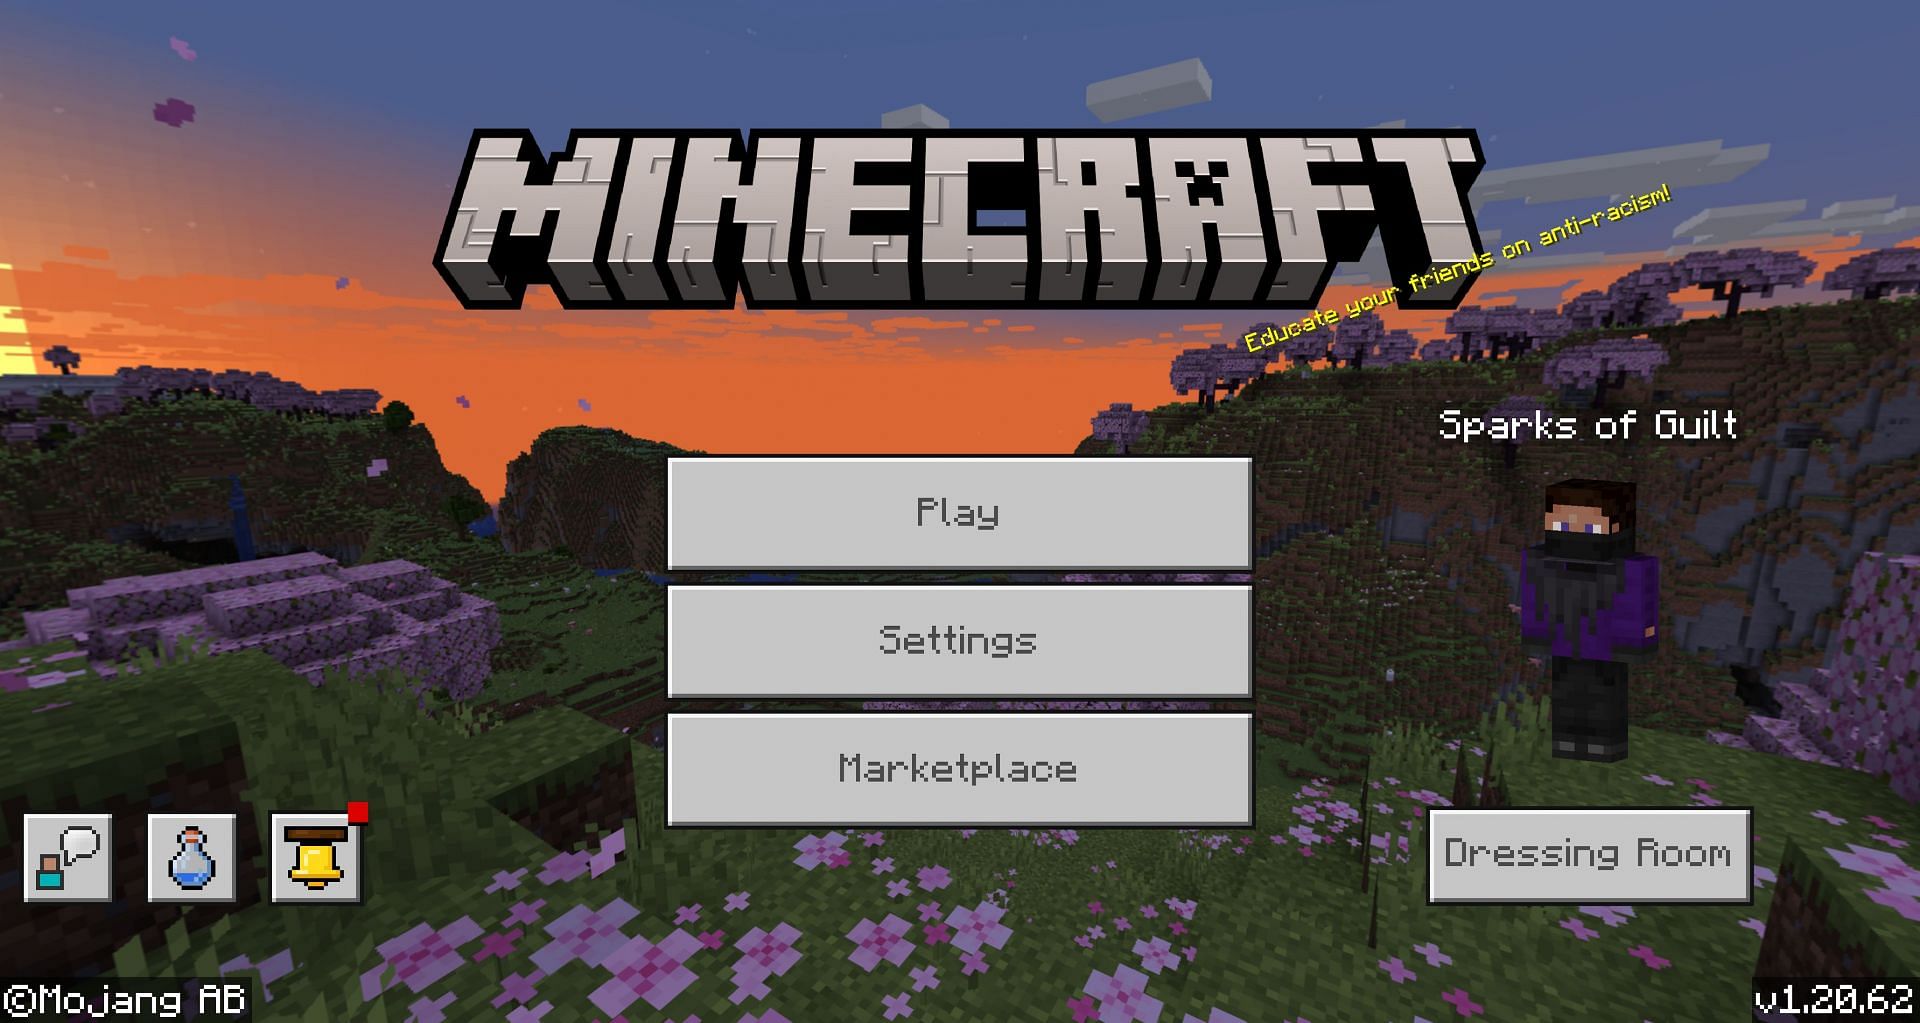 Bedrock is has more players than Java due to the number of platforms it